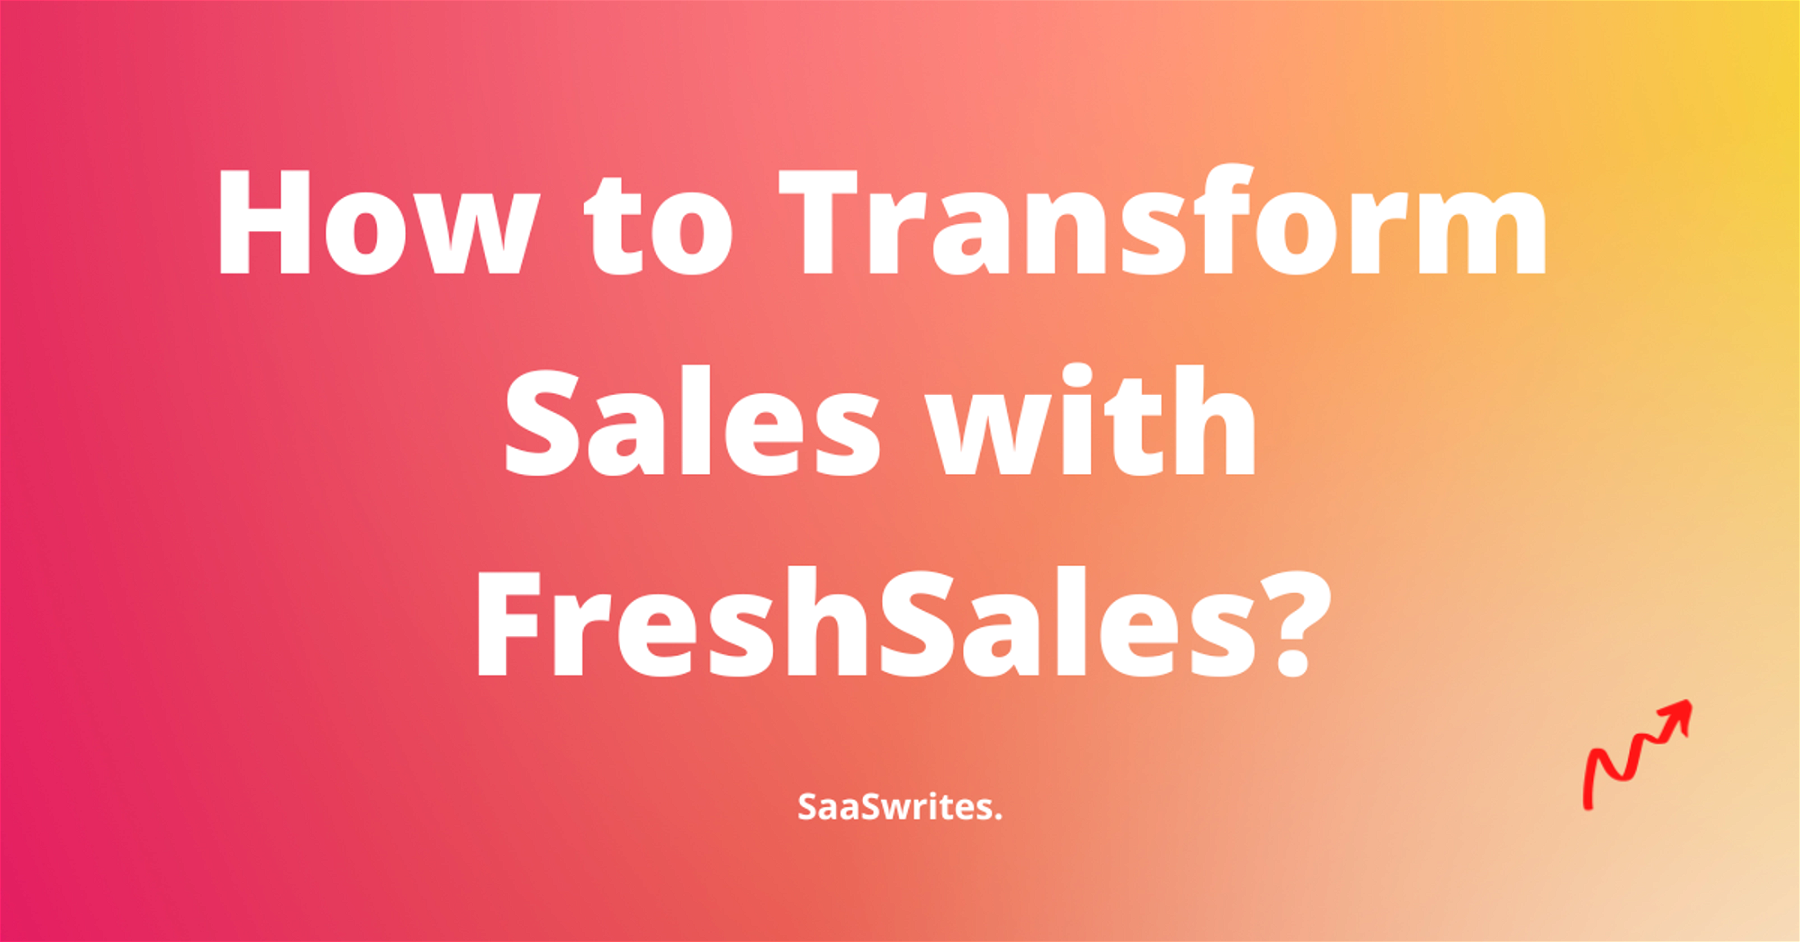 FreshSales: How to Transform Your Sales Process in 3 Months and Acquire 50+ Customers 